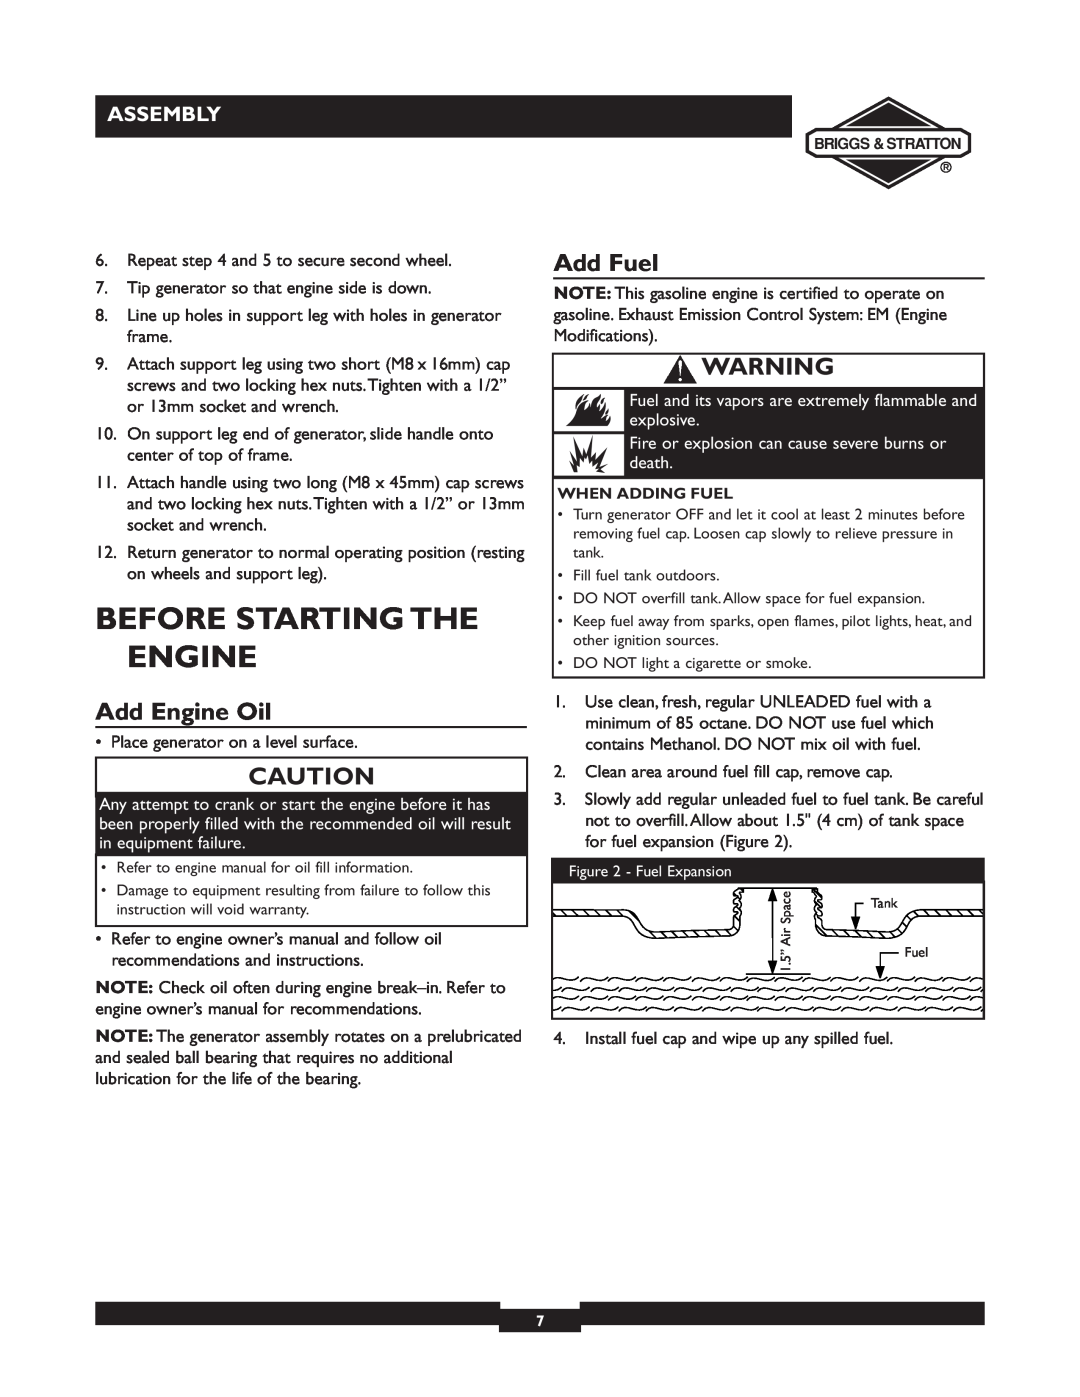 Briggs & Stratton 30238 owner manual Before Starting The Engine, Add Engine Oil, Add Fuel, Assembly 